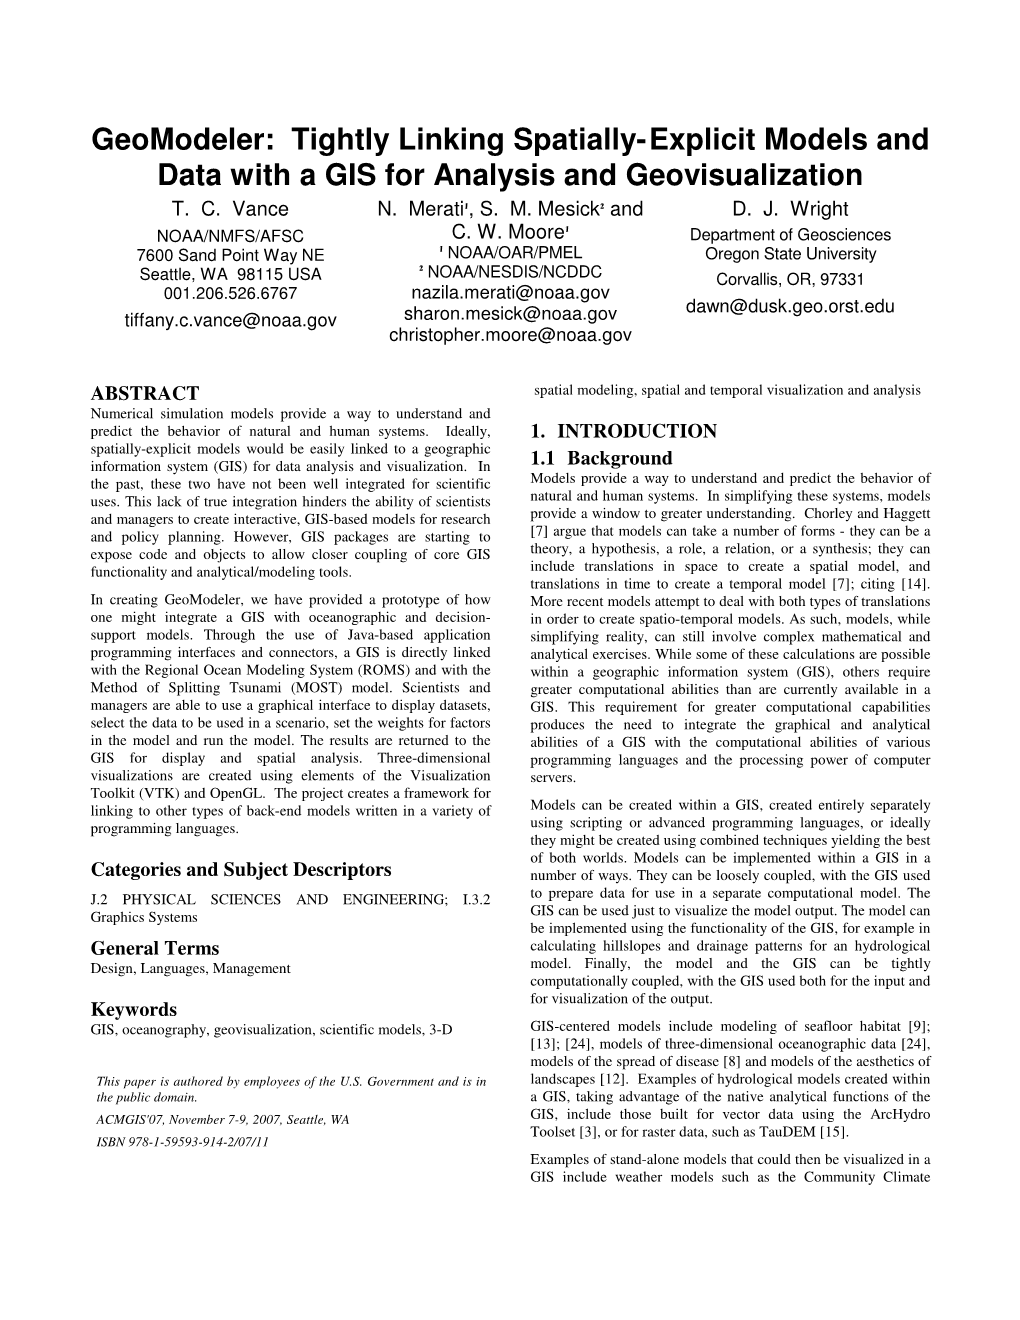 Geomodeler: Tightly Linking Spatially-Explicit Models and Data with a GIS for Analysis and Geovisualization T